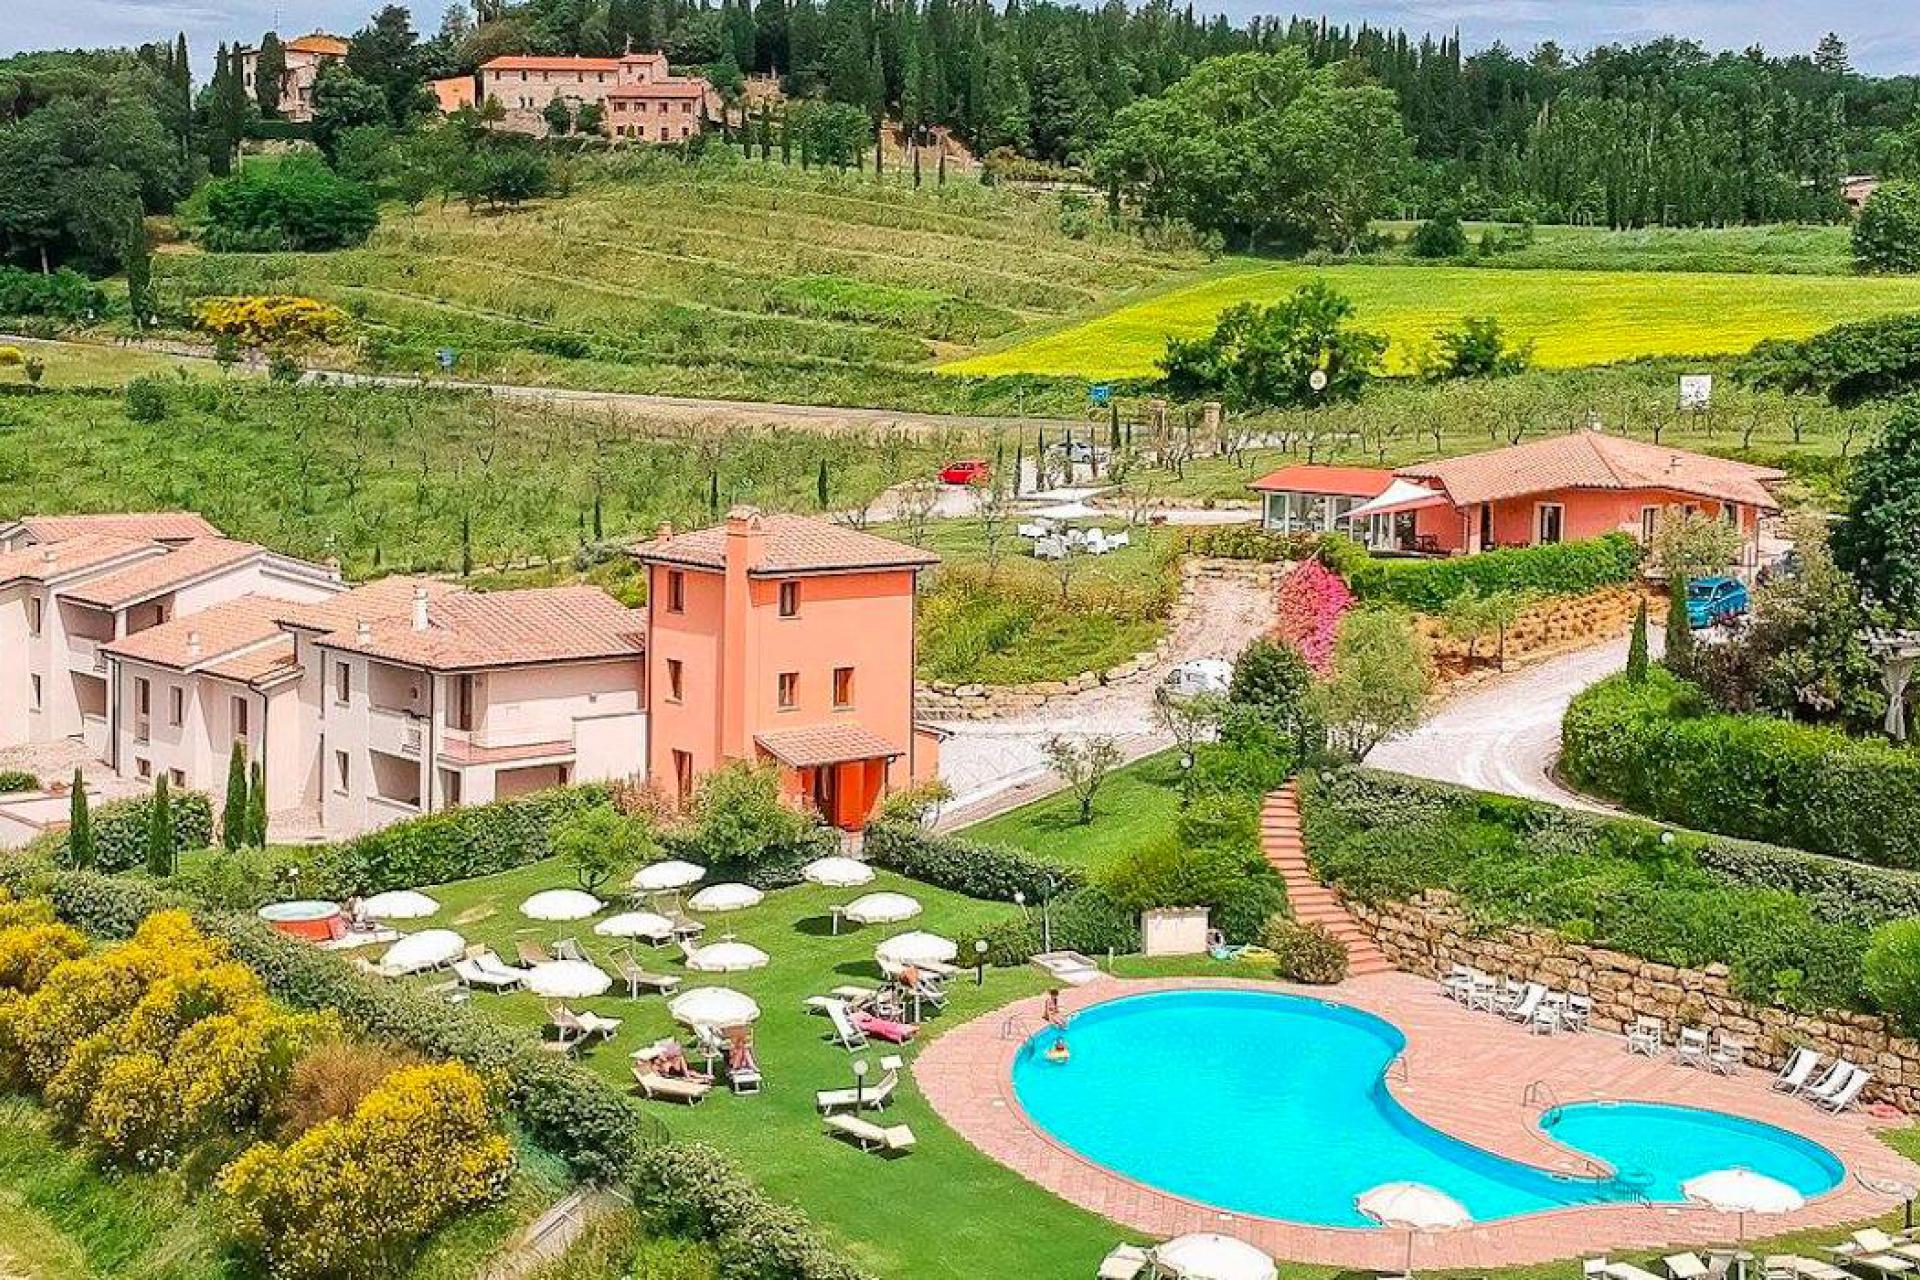 Large agriturismo with family apartments